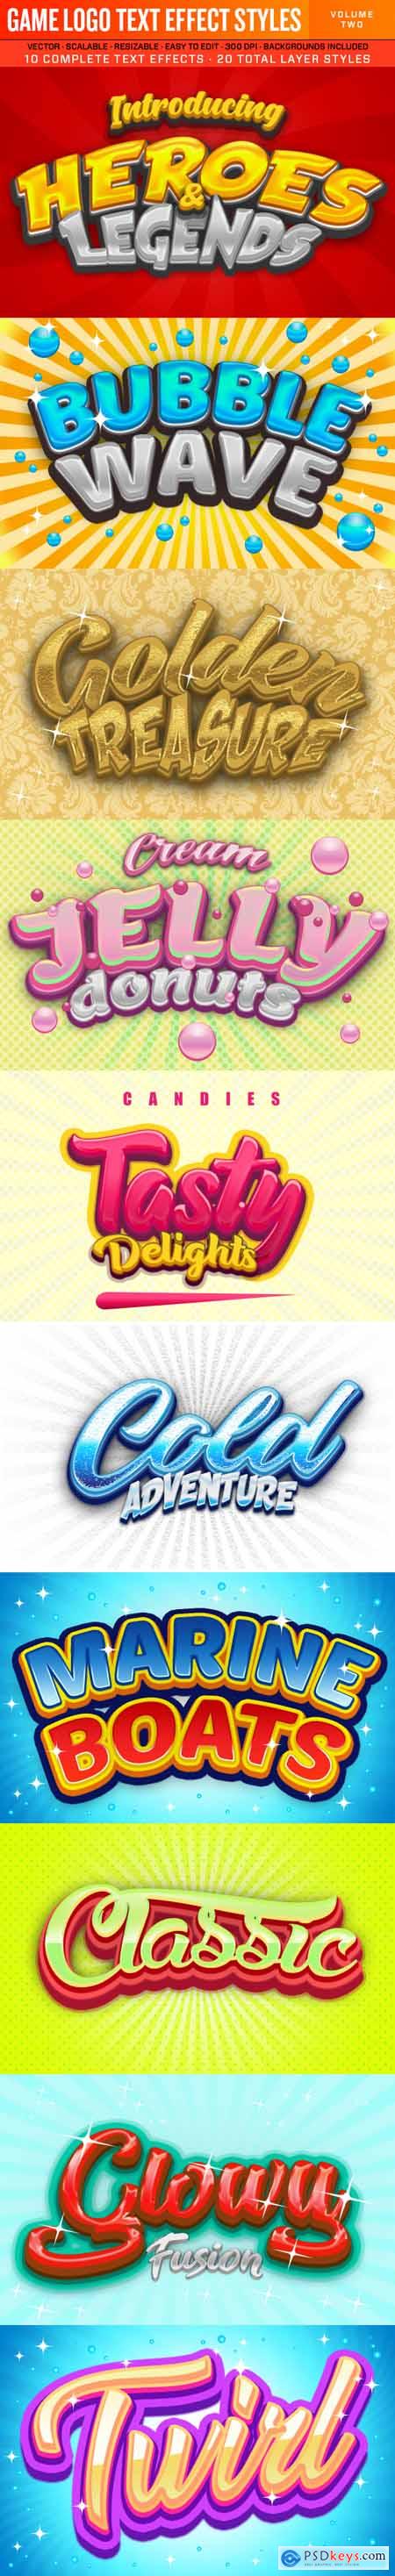 Graphicriver Game Logo Text Effect Styles 2